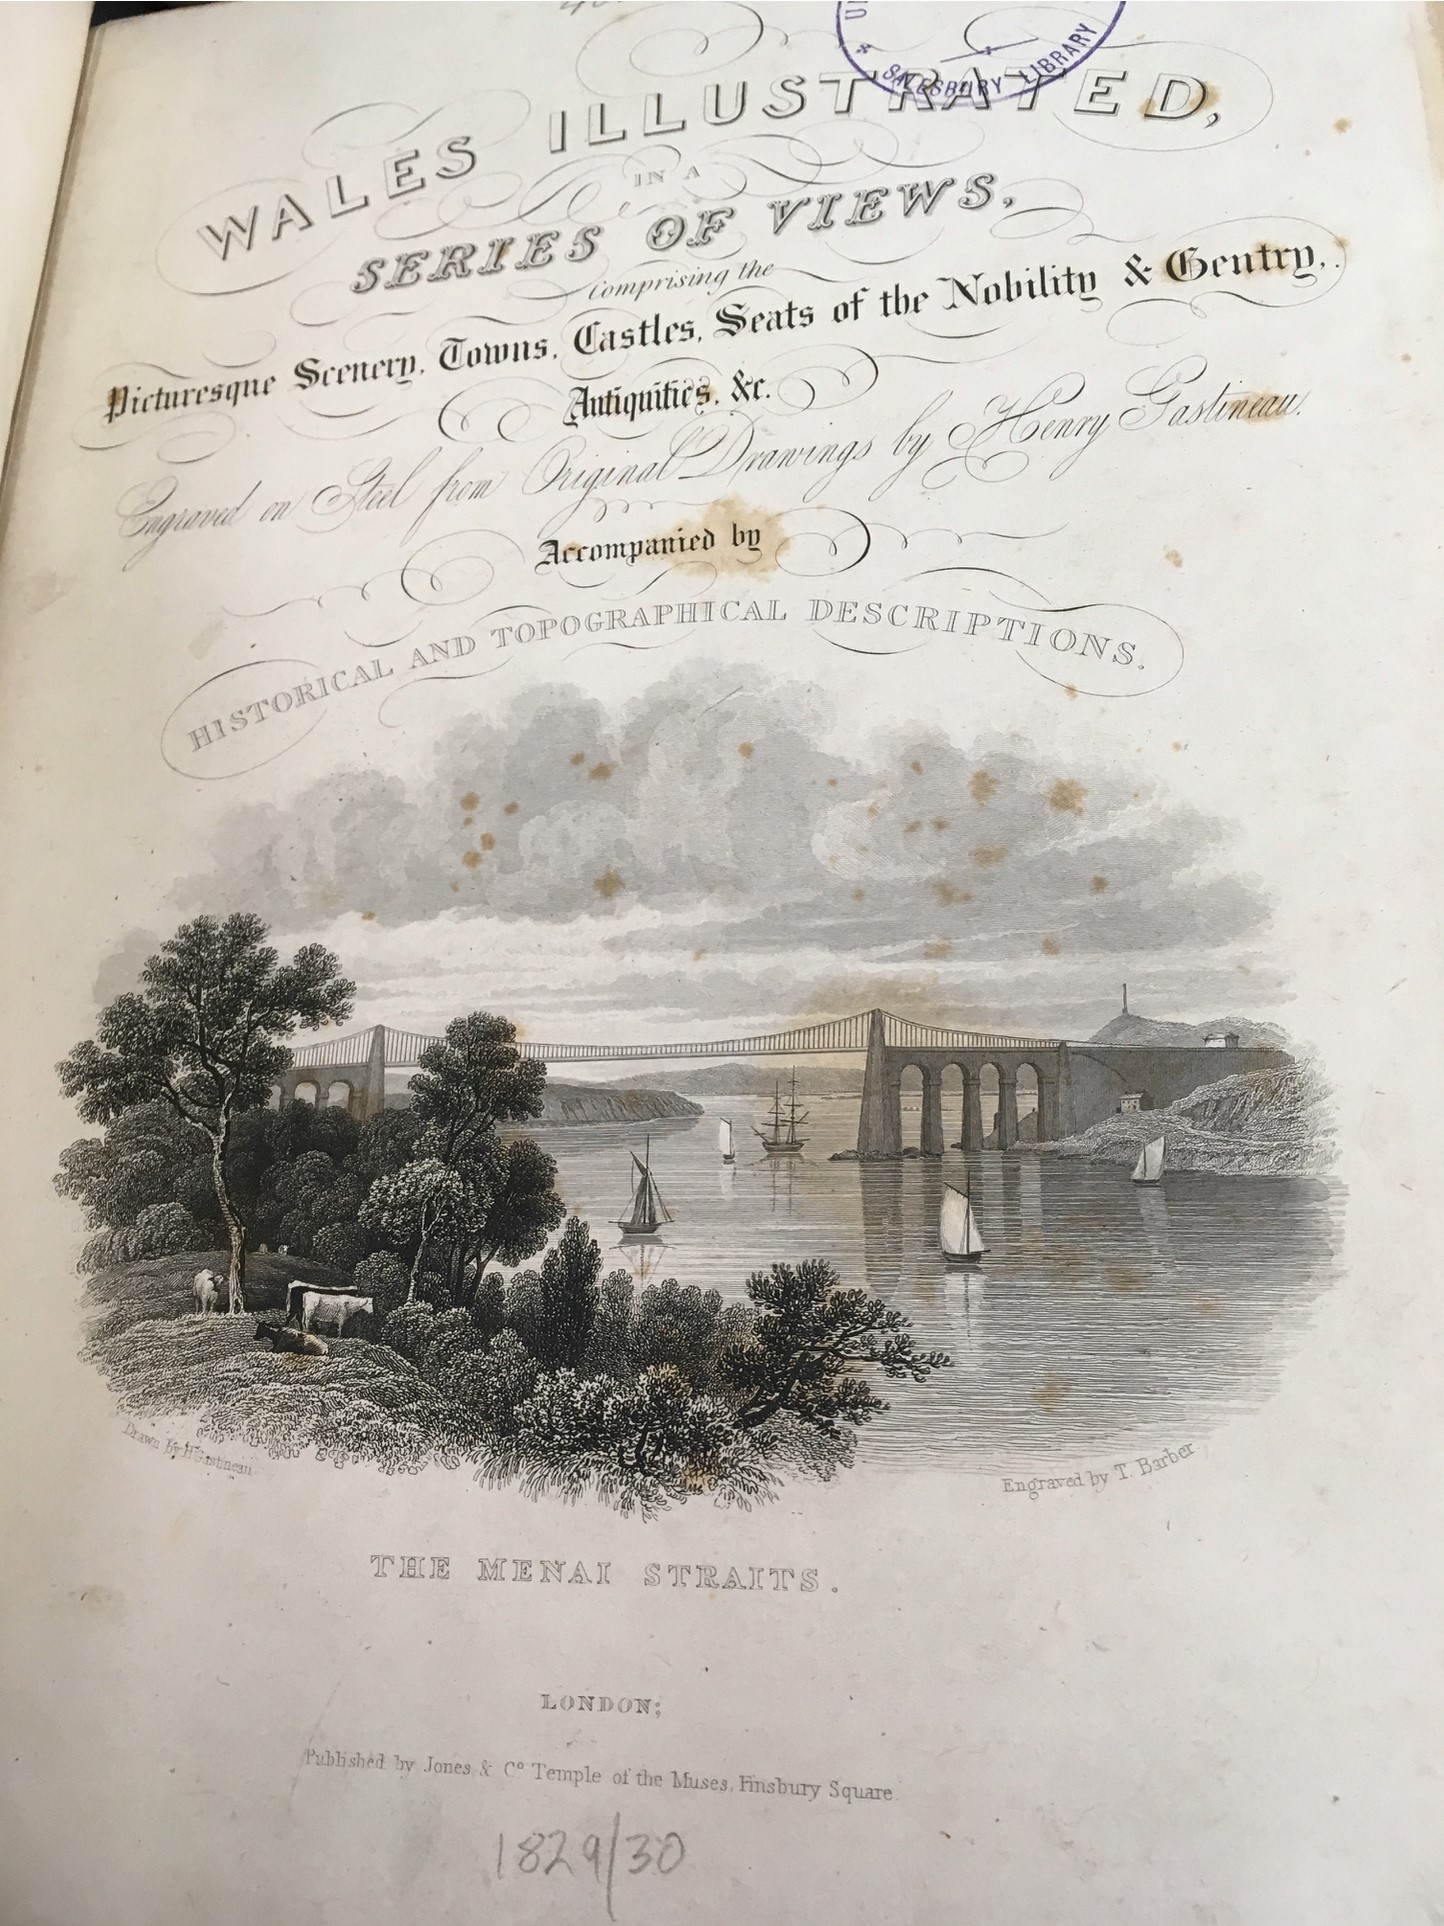 Henry G. Gastineau, Wales illustrated, in a series of views (1829?-1830)